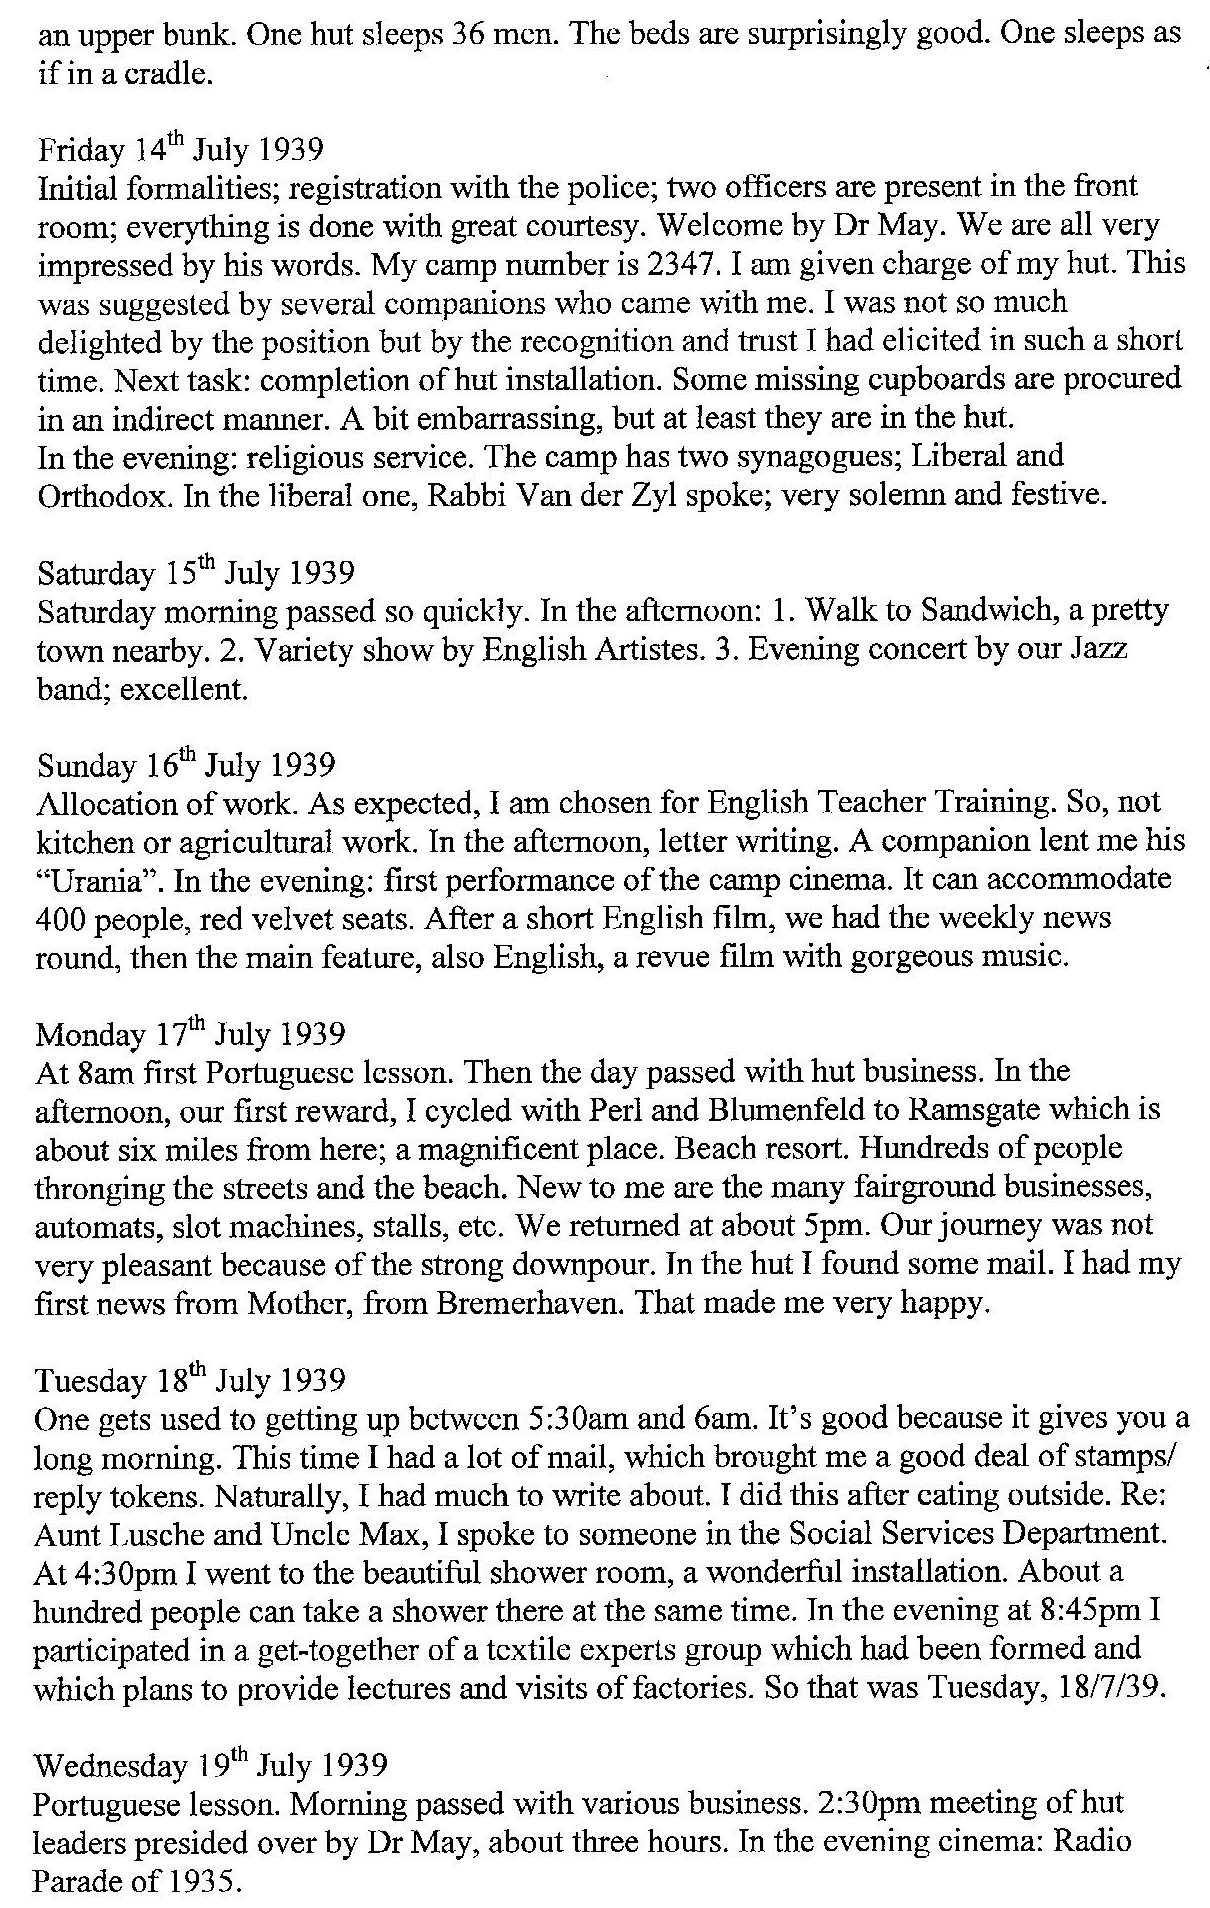 Lothar Nelken, Kitchener Camp diary, 1939 to 1940, Friday 14 July to 19 July 1939, page 2